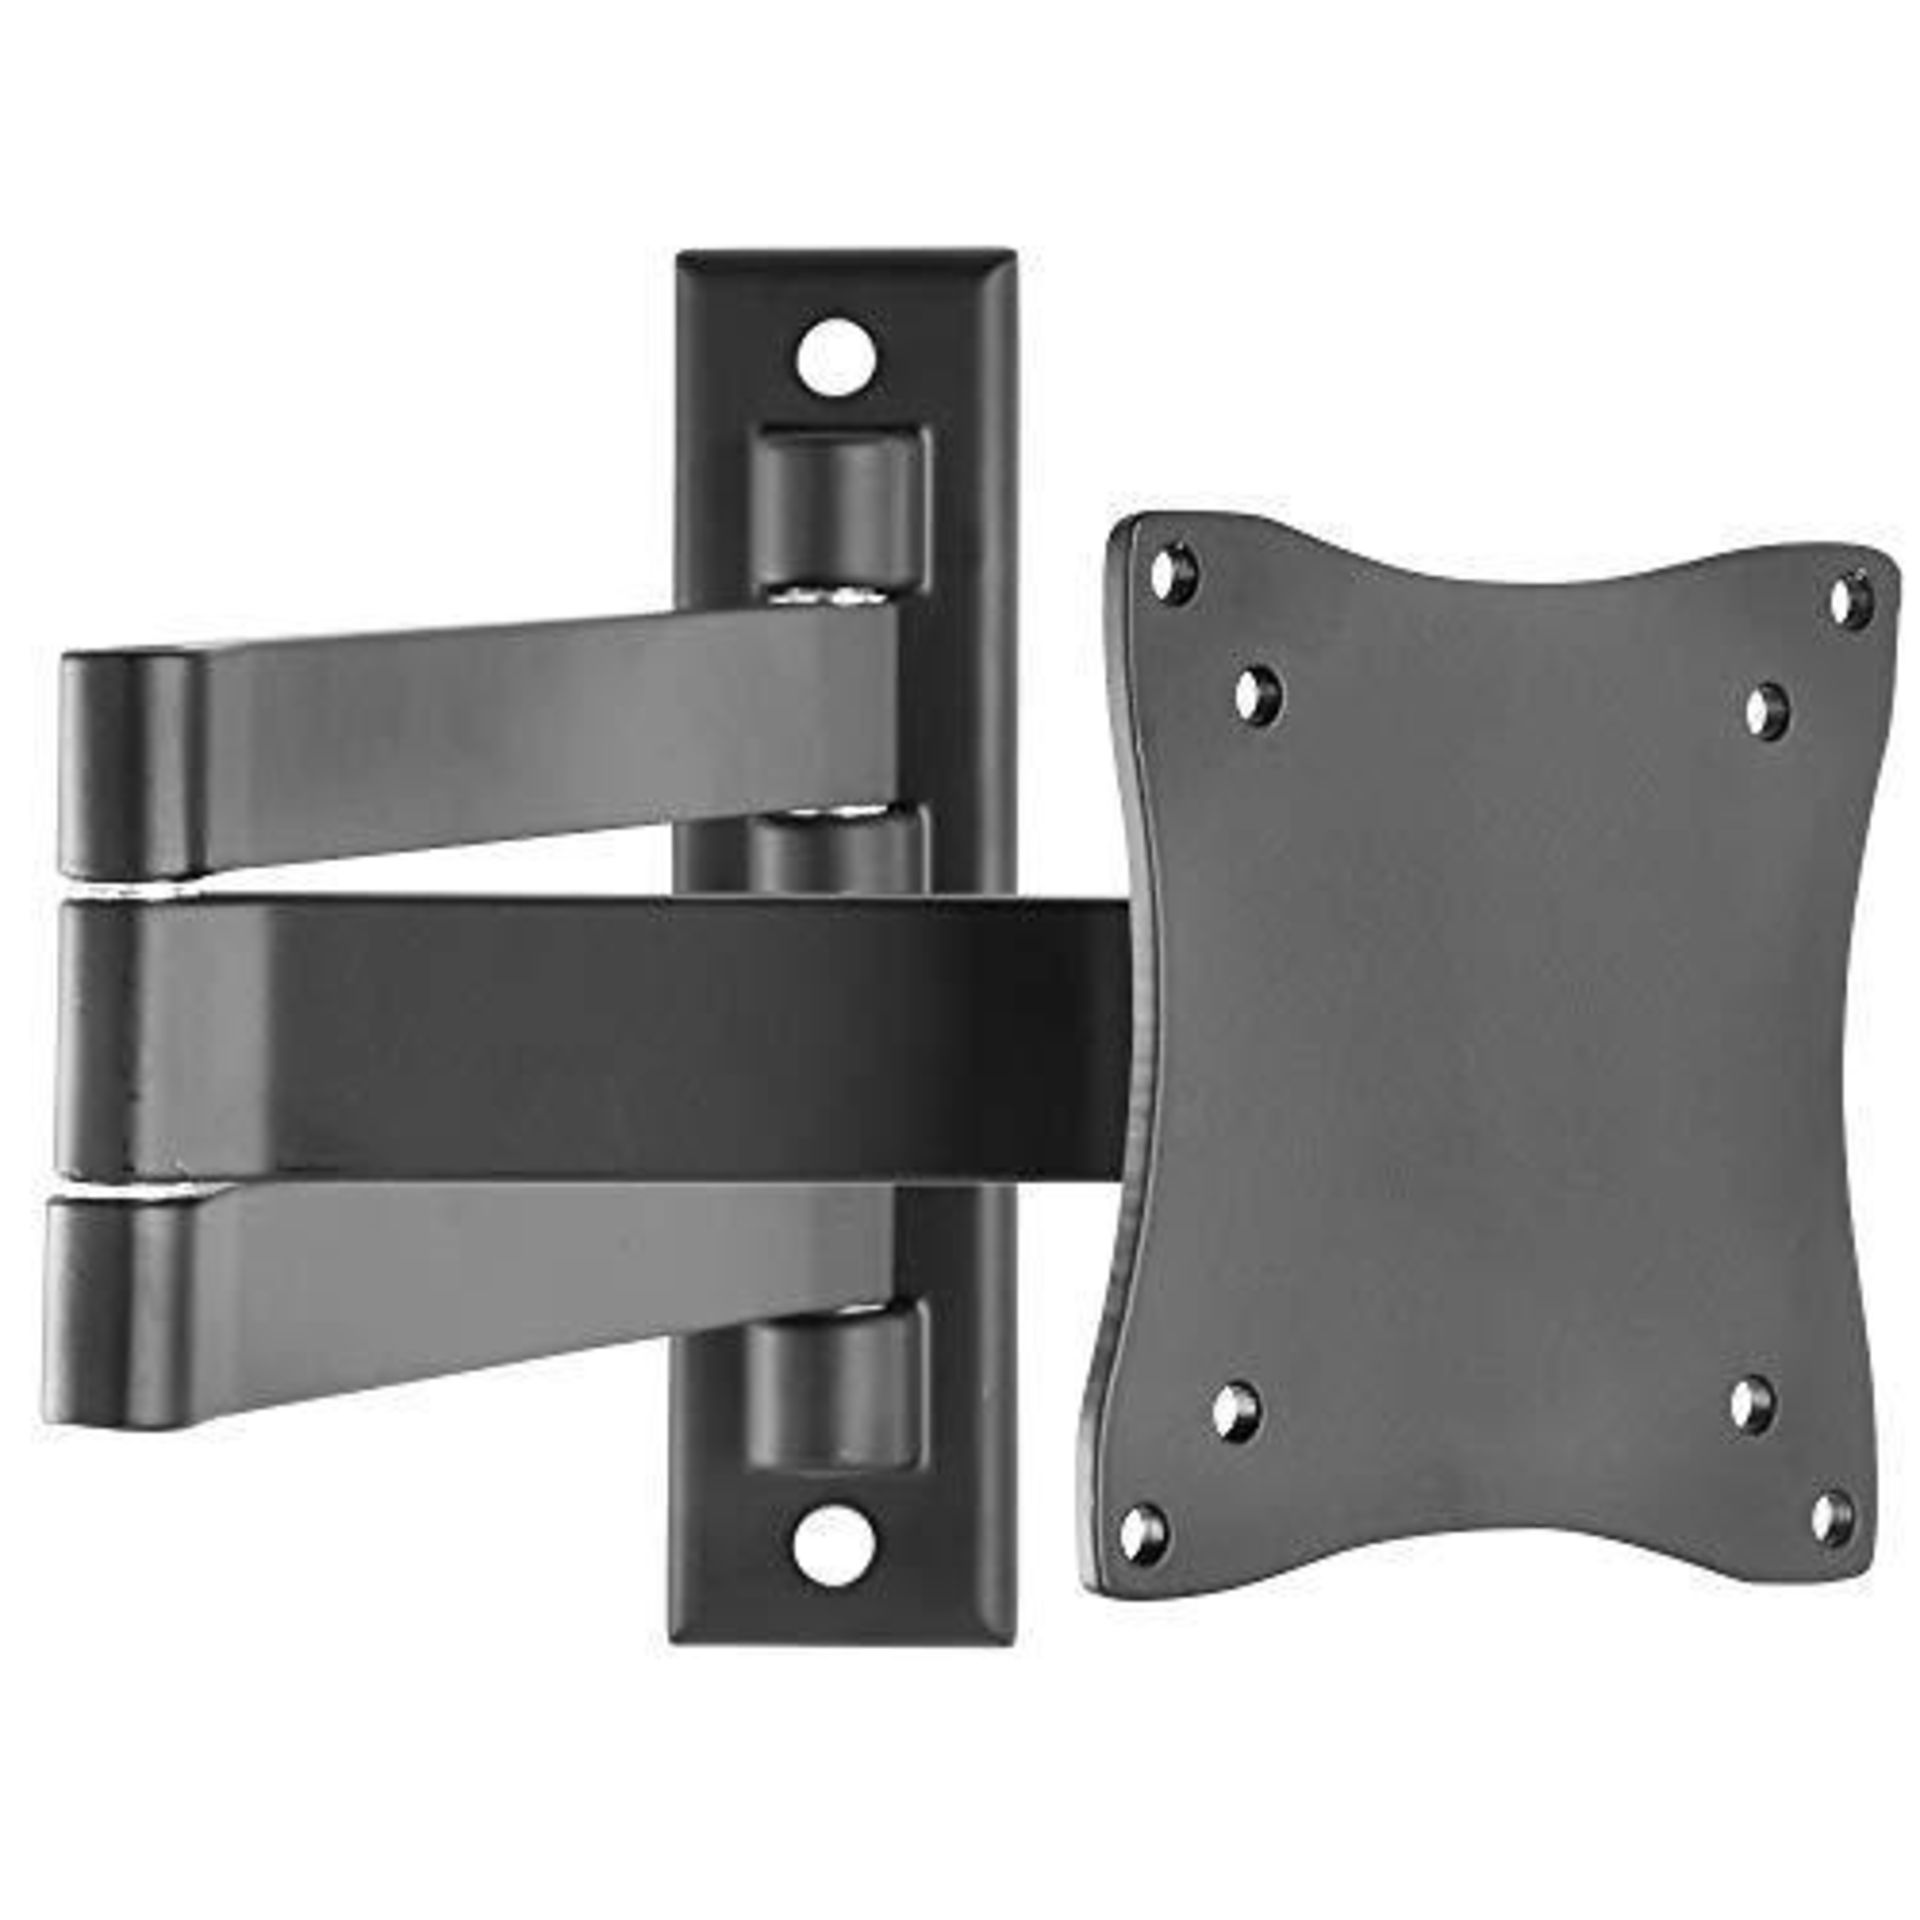 Luxury Cantilever LCD Monitor TV Arm Bracket Wall Mount With Swivel And Tilt (ER51) Luxury